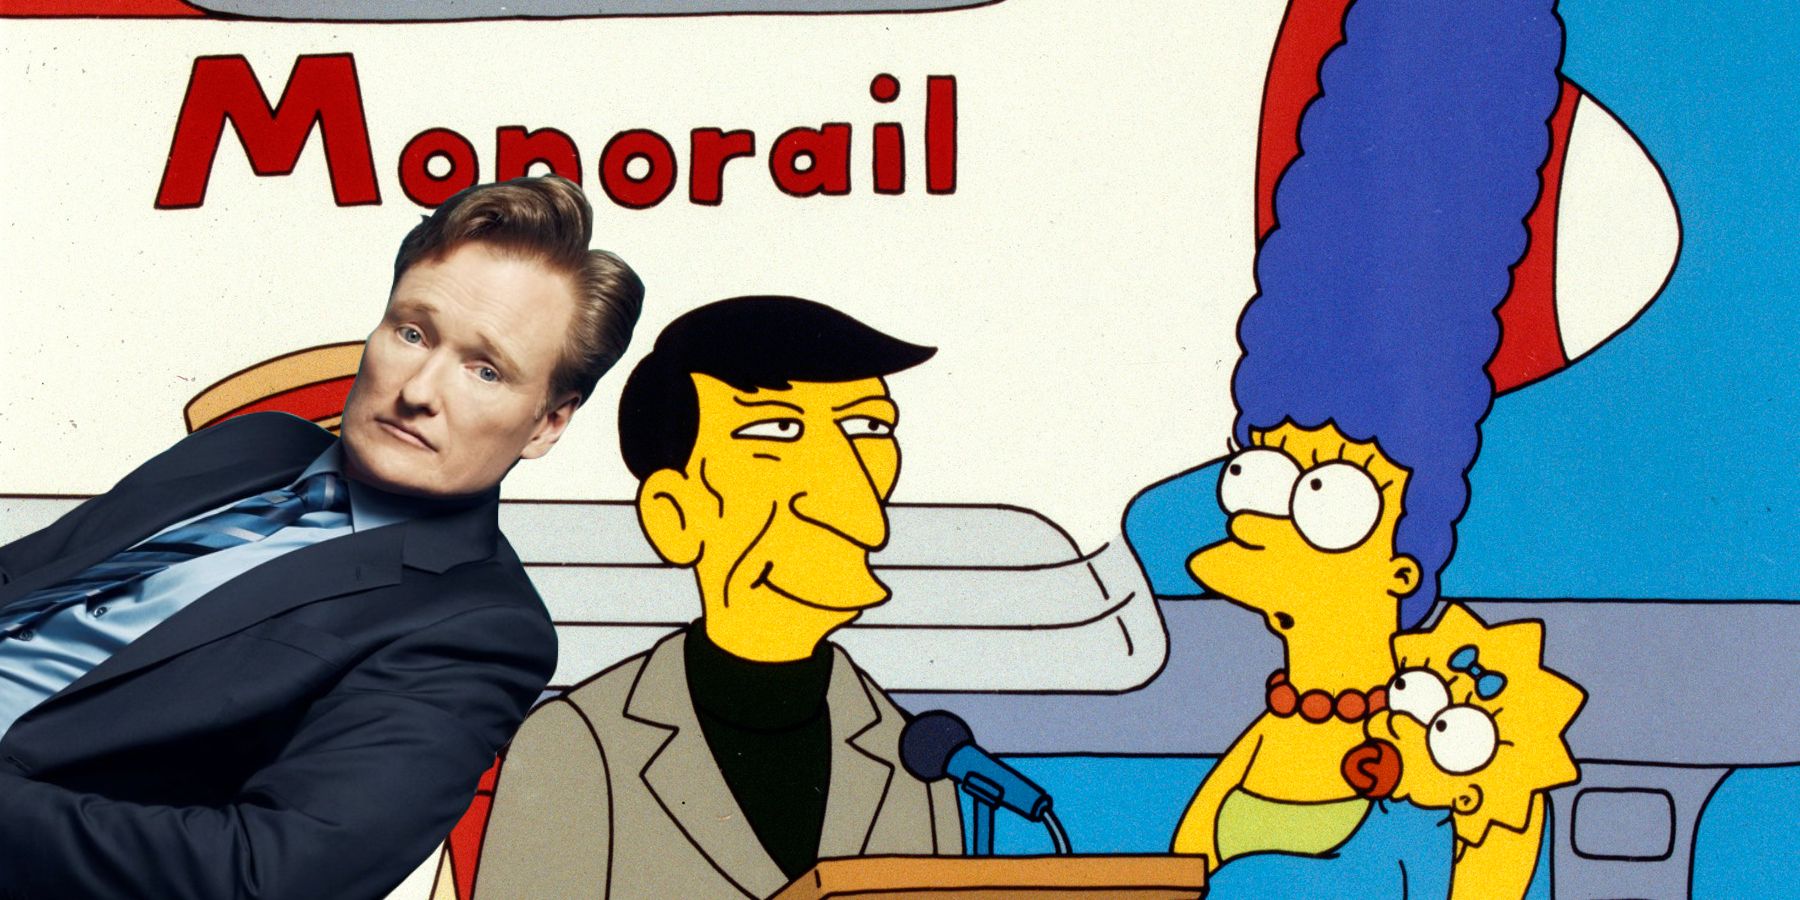 Conan O'Brien photoshopped into an image of Marge and Maggie in front of a monorail